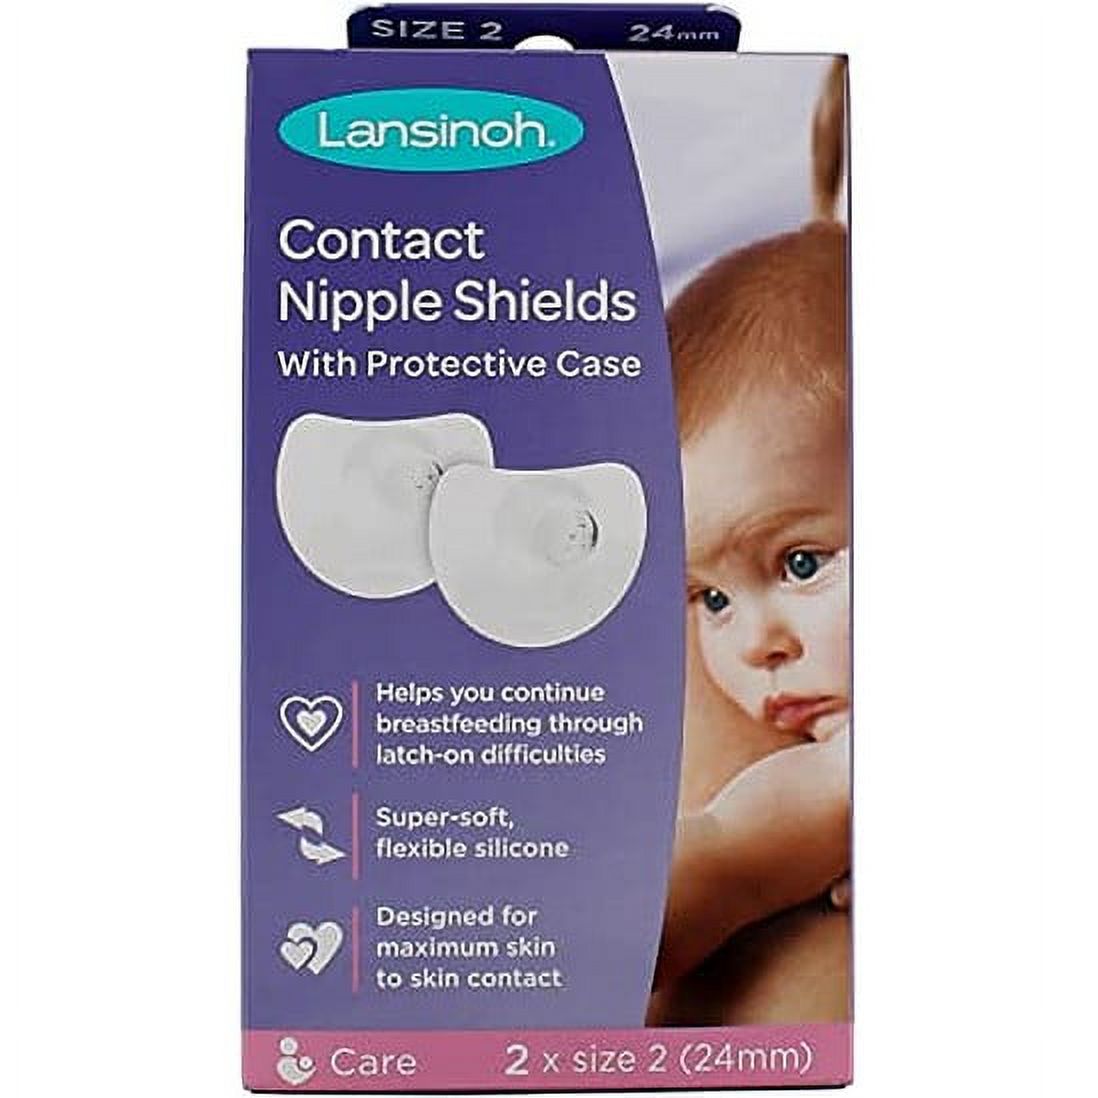 Non-Sterile Contact Nipple Shield 24 mm (2 Packs of 2 ct.) - image 1 of 2